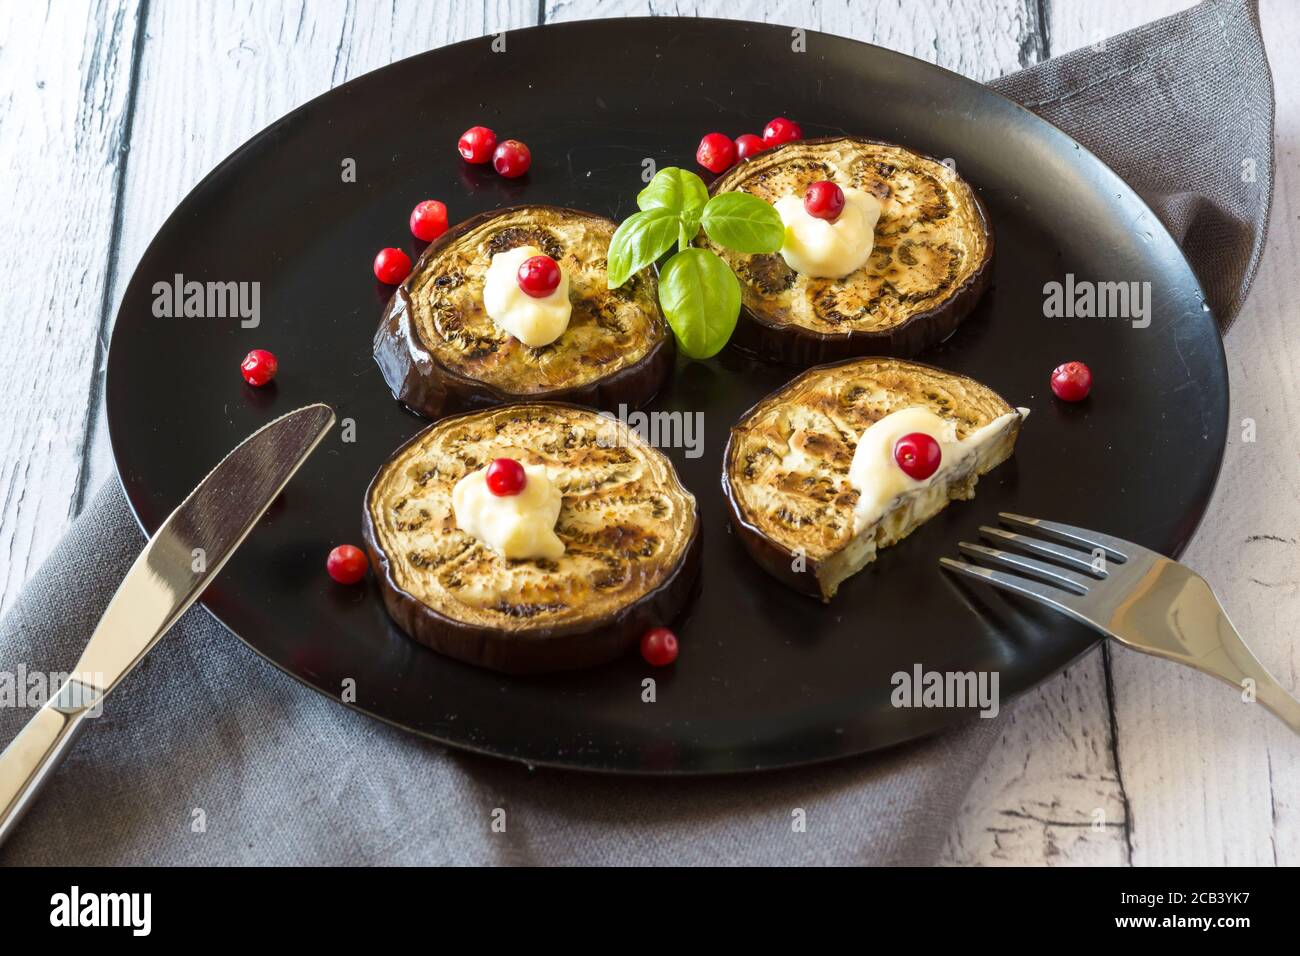 Fried eggplant stuffed with cranberries, garnished with Basil leaves on a dark plate over wooden background. Top view. Stock Photo